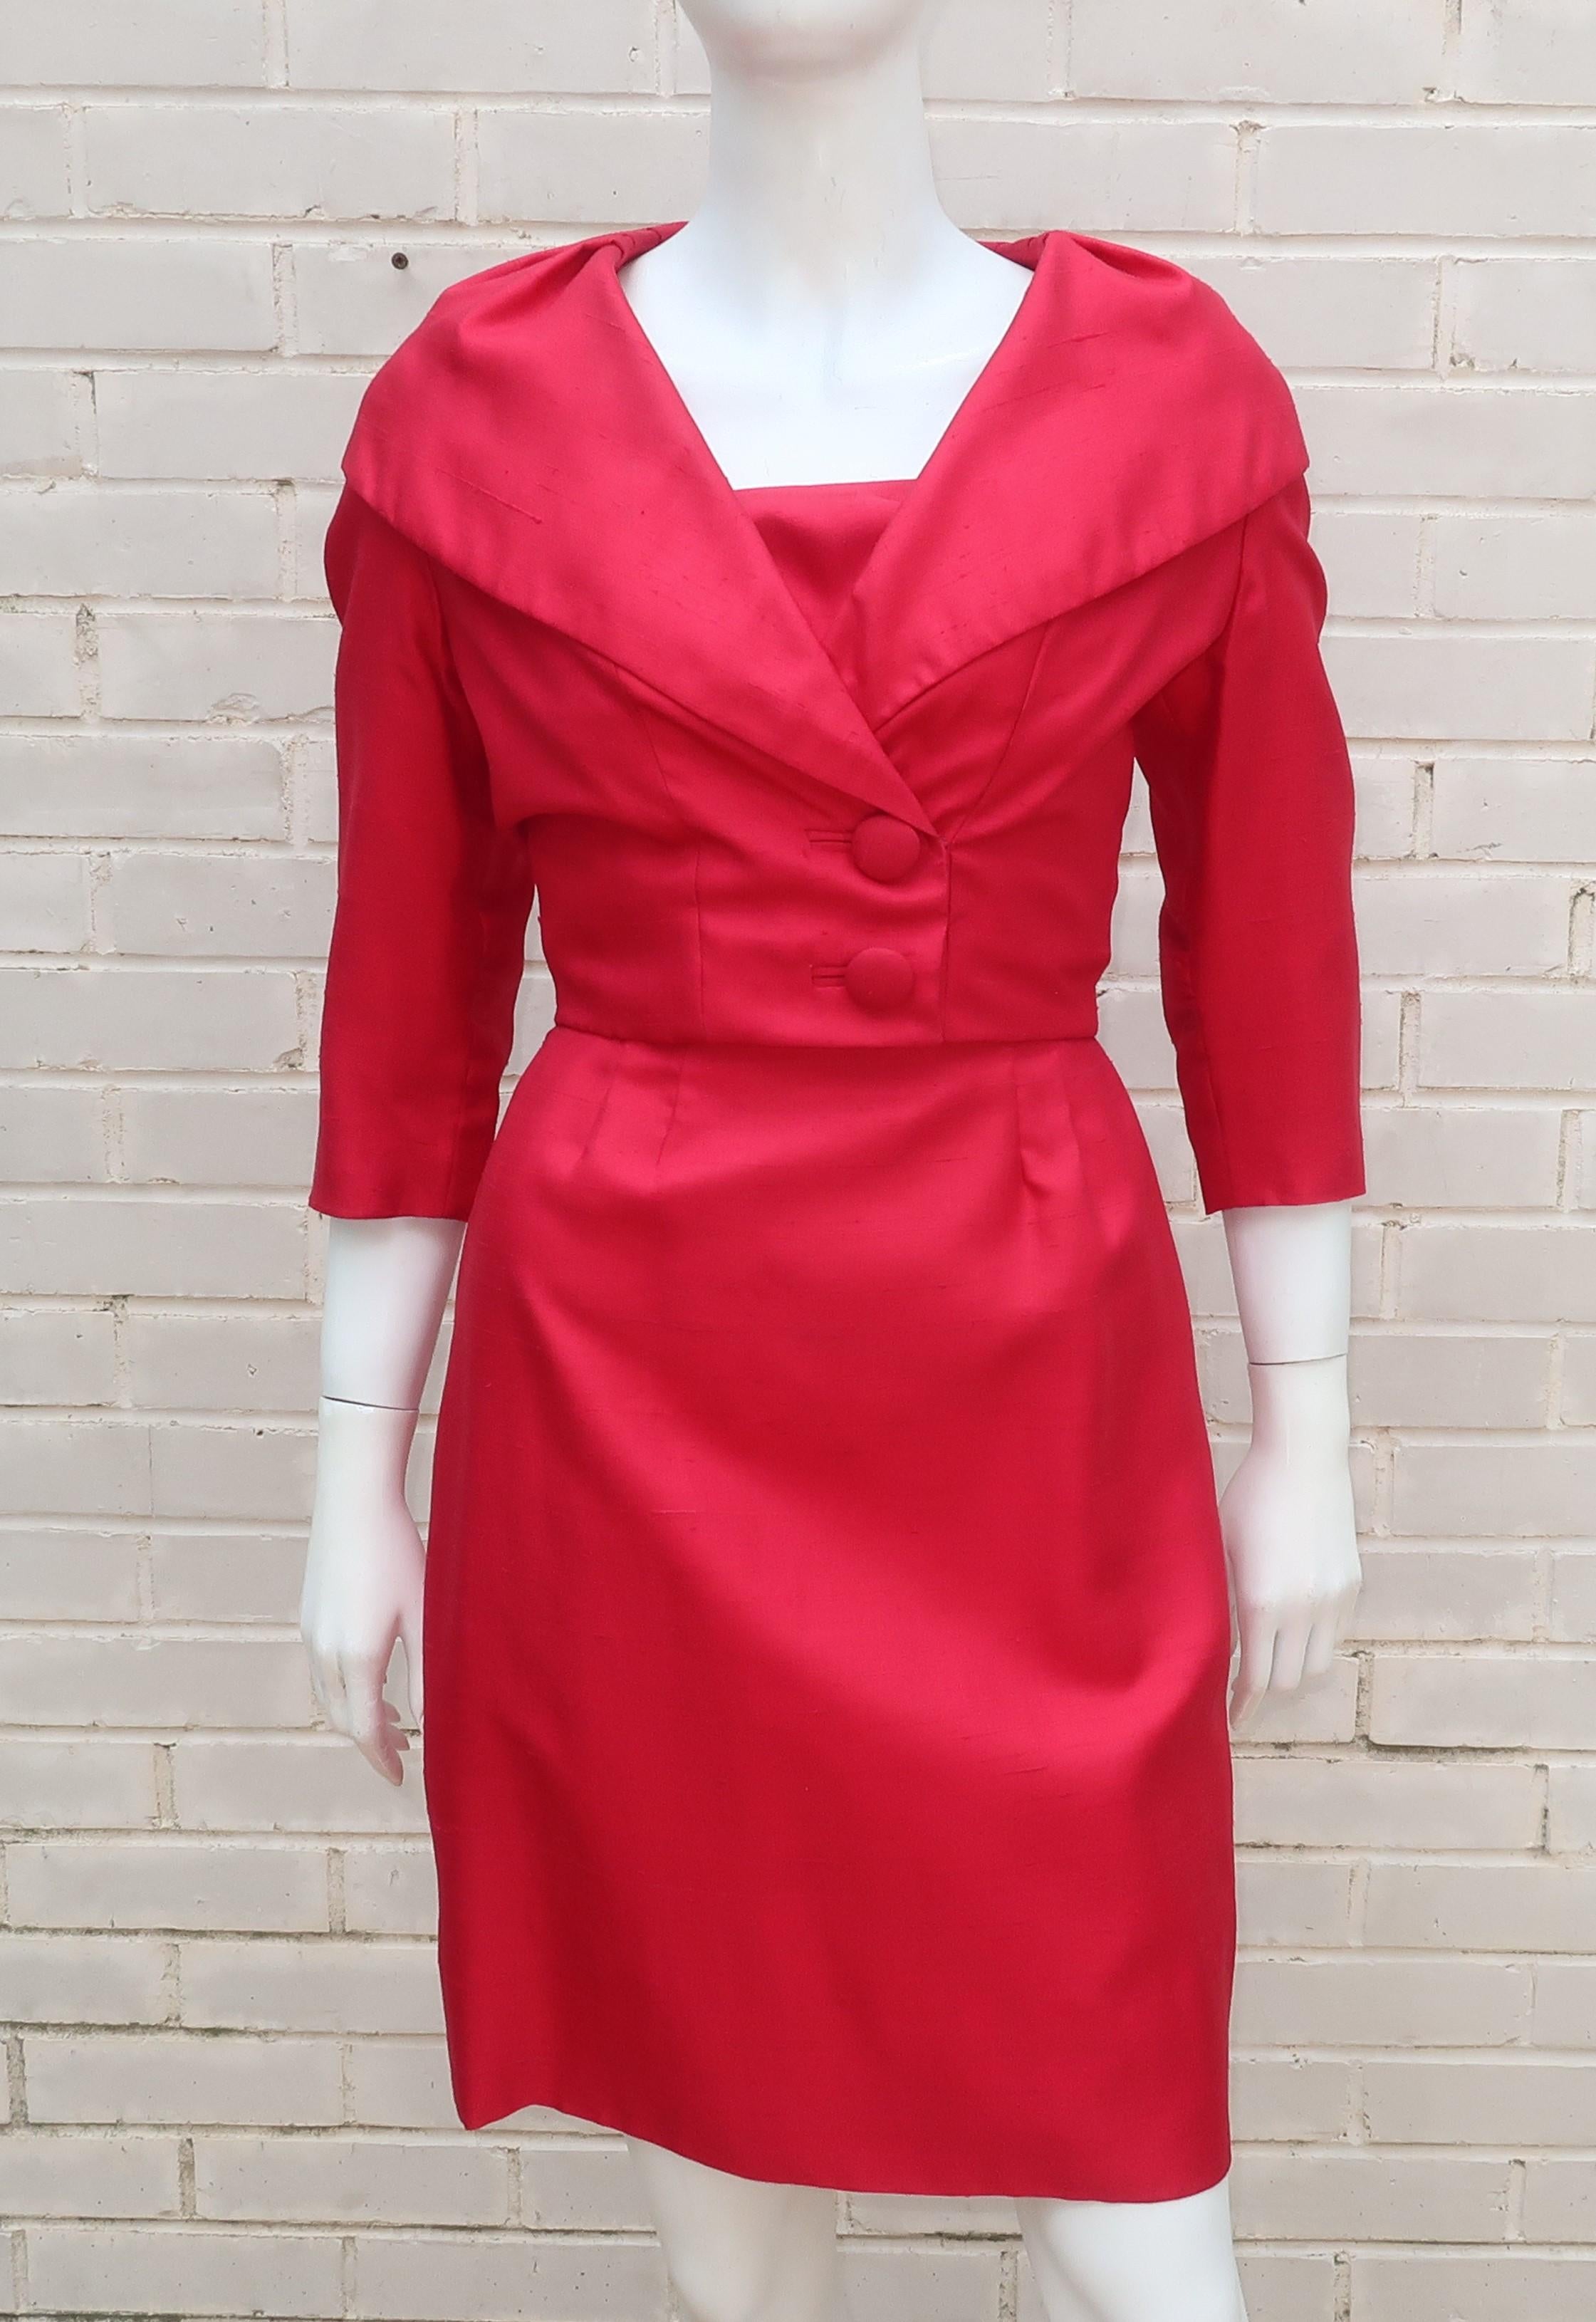 1950’s Elaine Terry red shantung silk dress and jacket set with a red hot Marilyn Monroe vibe.  The dress zips and hooks at the back with a unique ruched bust and upper bodice that creates a lovely neckline.  The cropped jacket buttons at the front